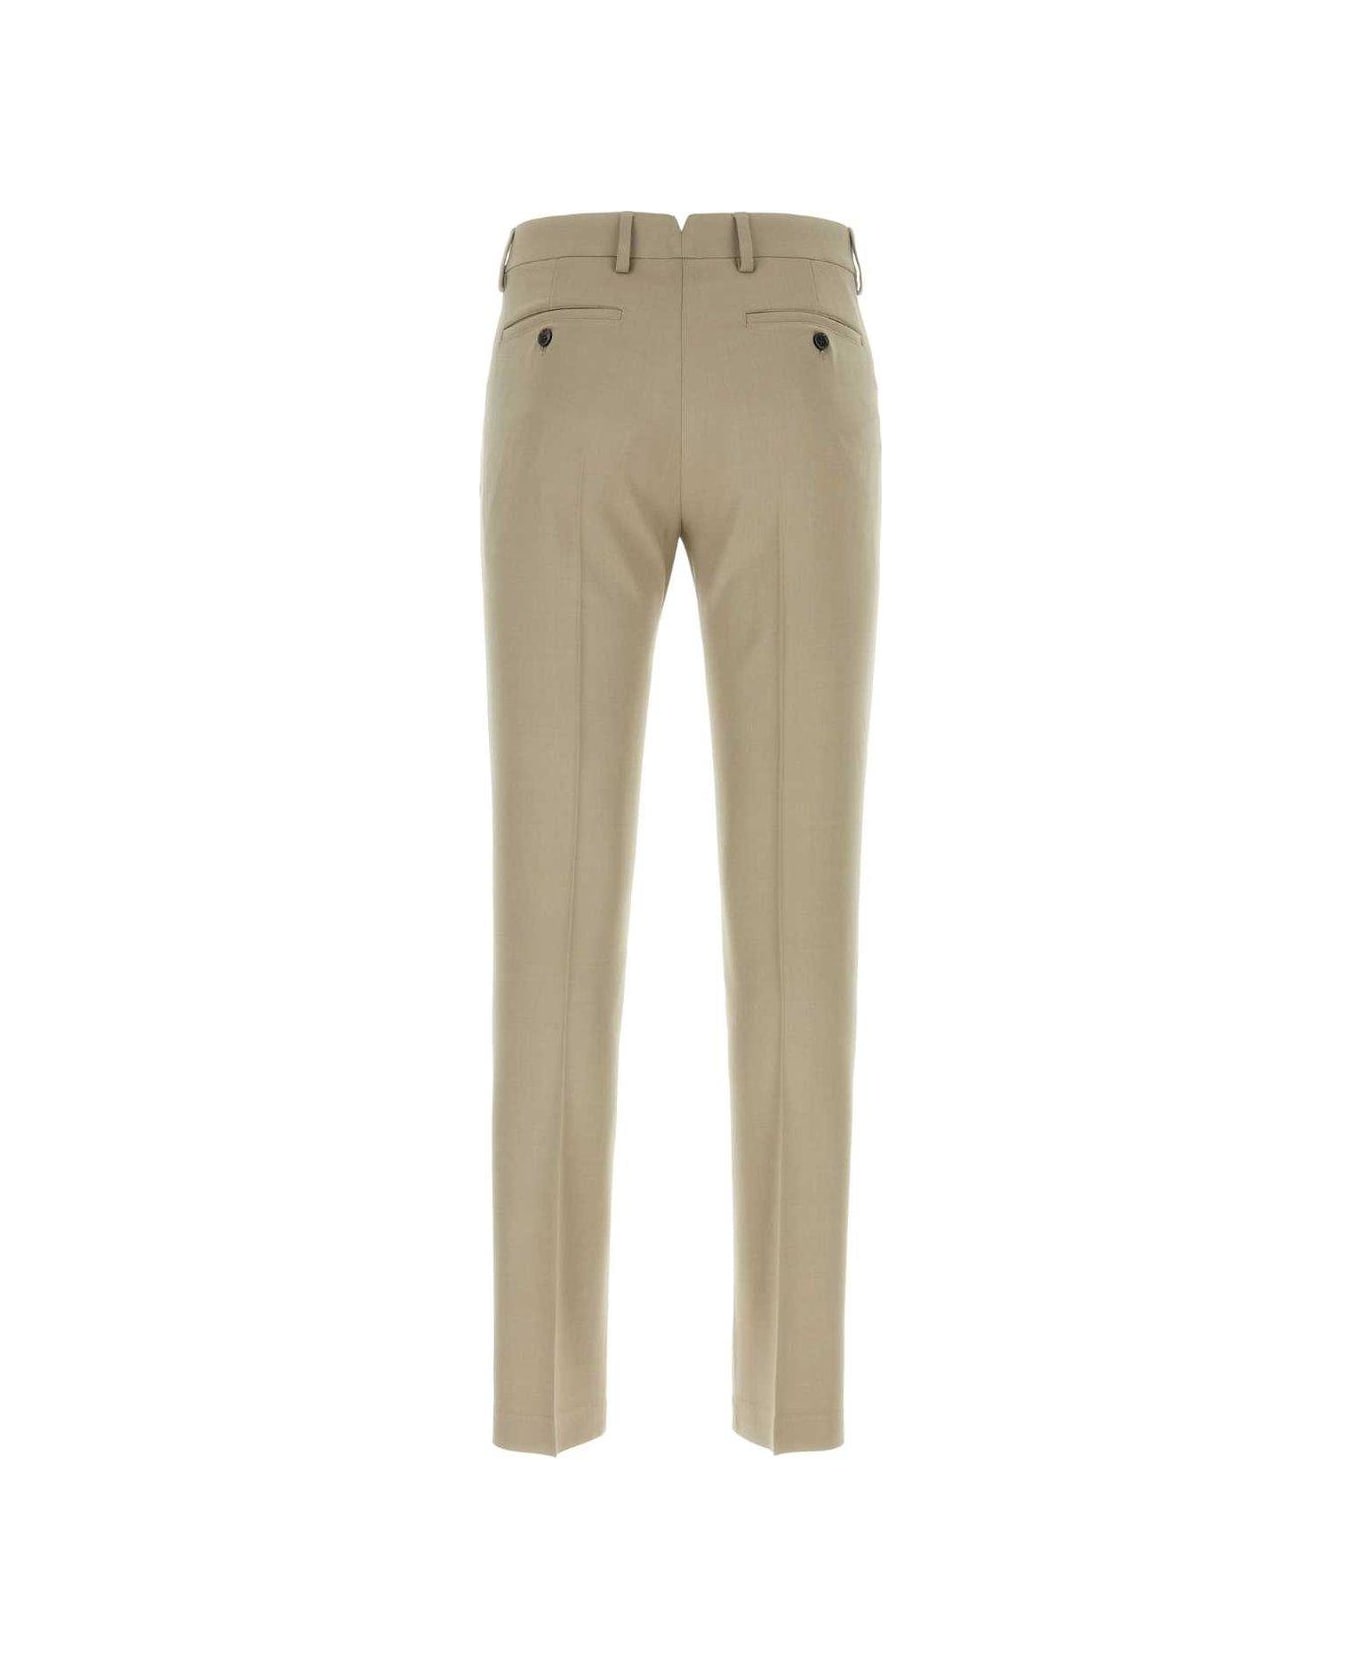 Ami Alexandre Mattiussi Tapered Trousers - Beige ボトムス